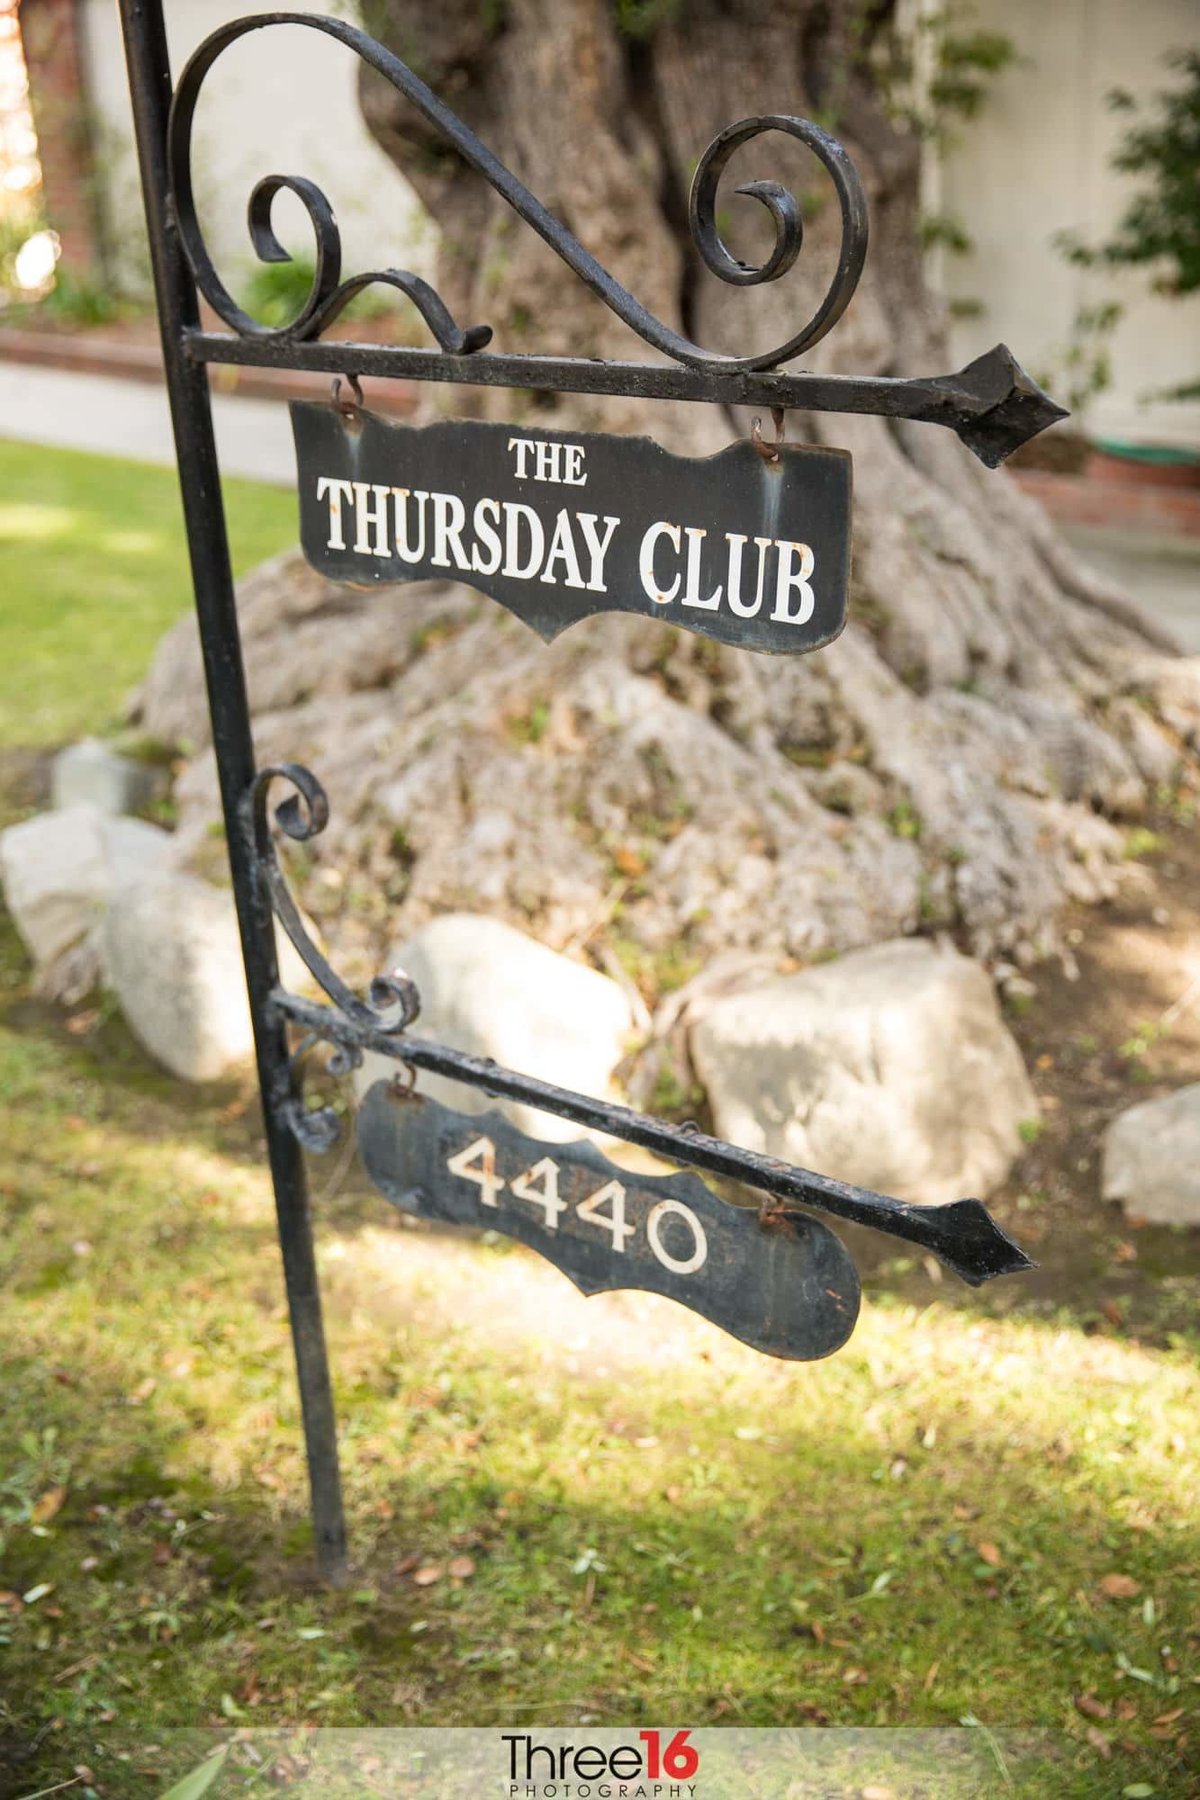 Welcome to The Thursday Club in La Canada Flintridge